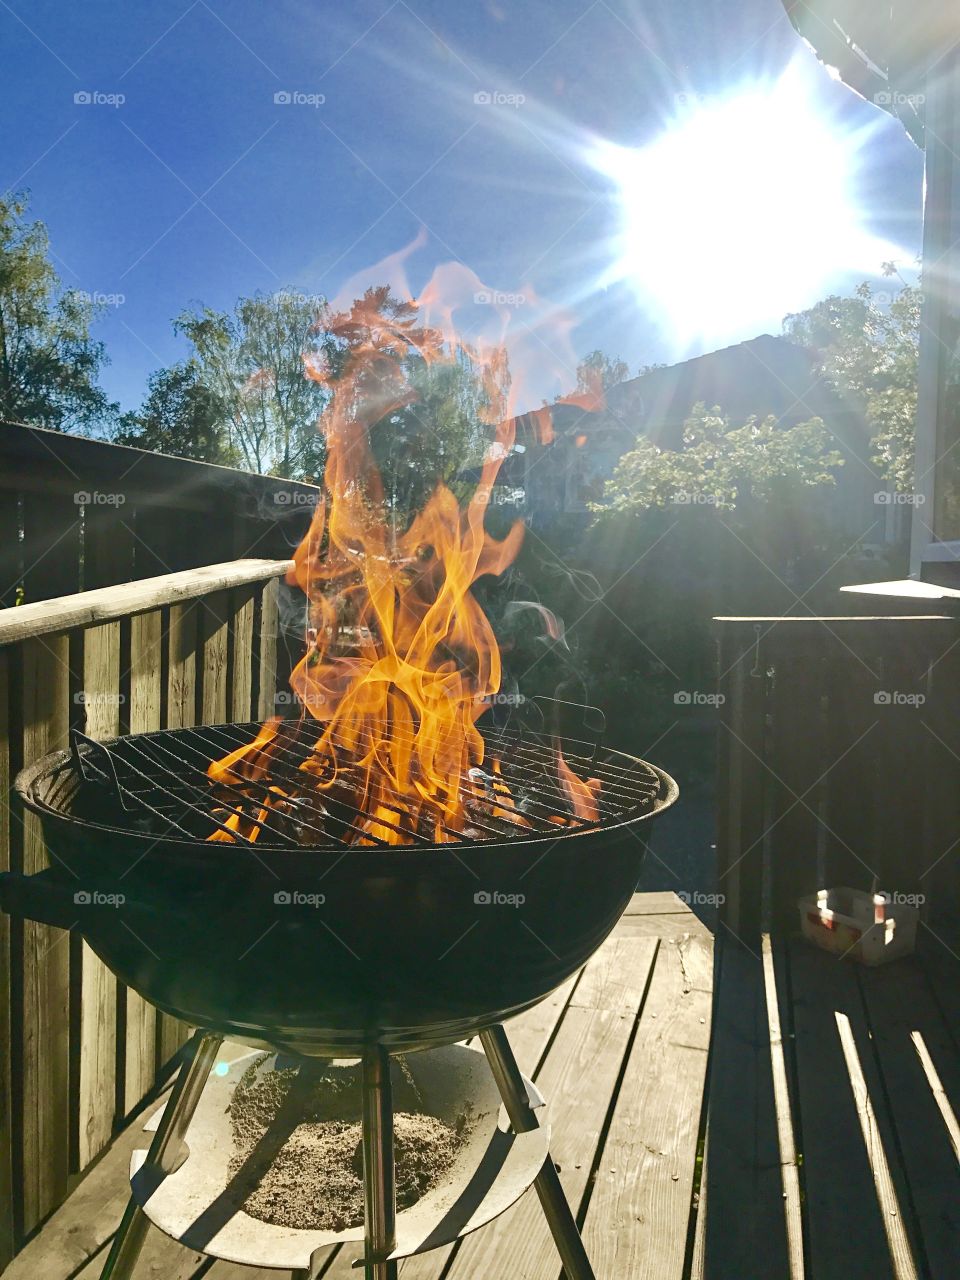 Barbeque in sunshine, summer is here